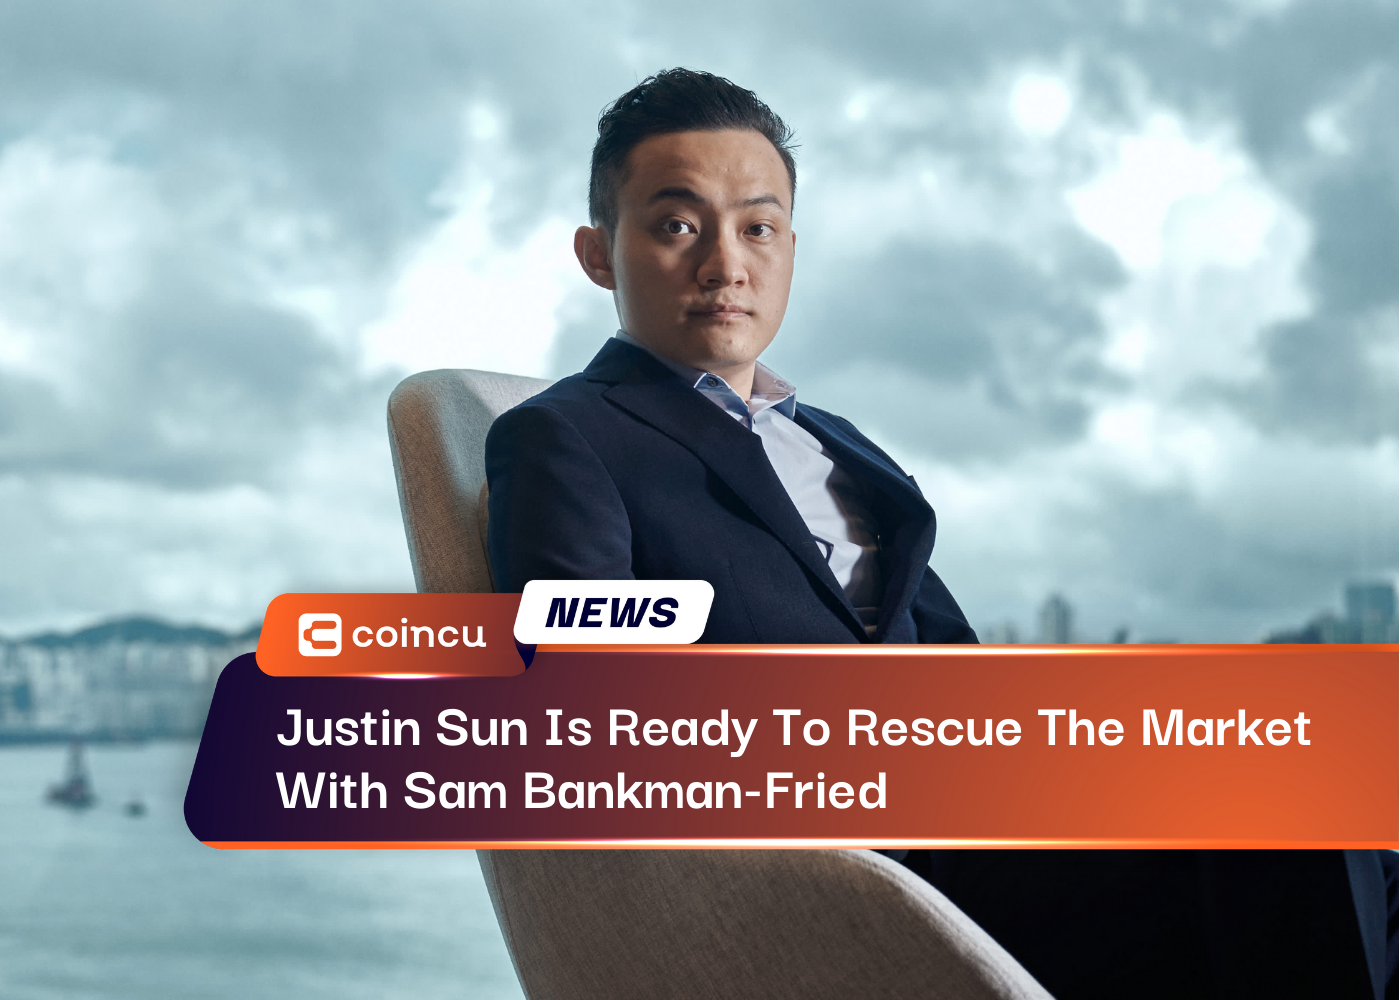 Justin Sun Is Ready To Rescue The Market With Sam Bankman-Fried